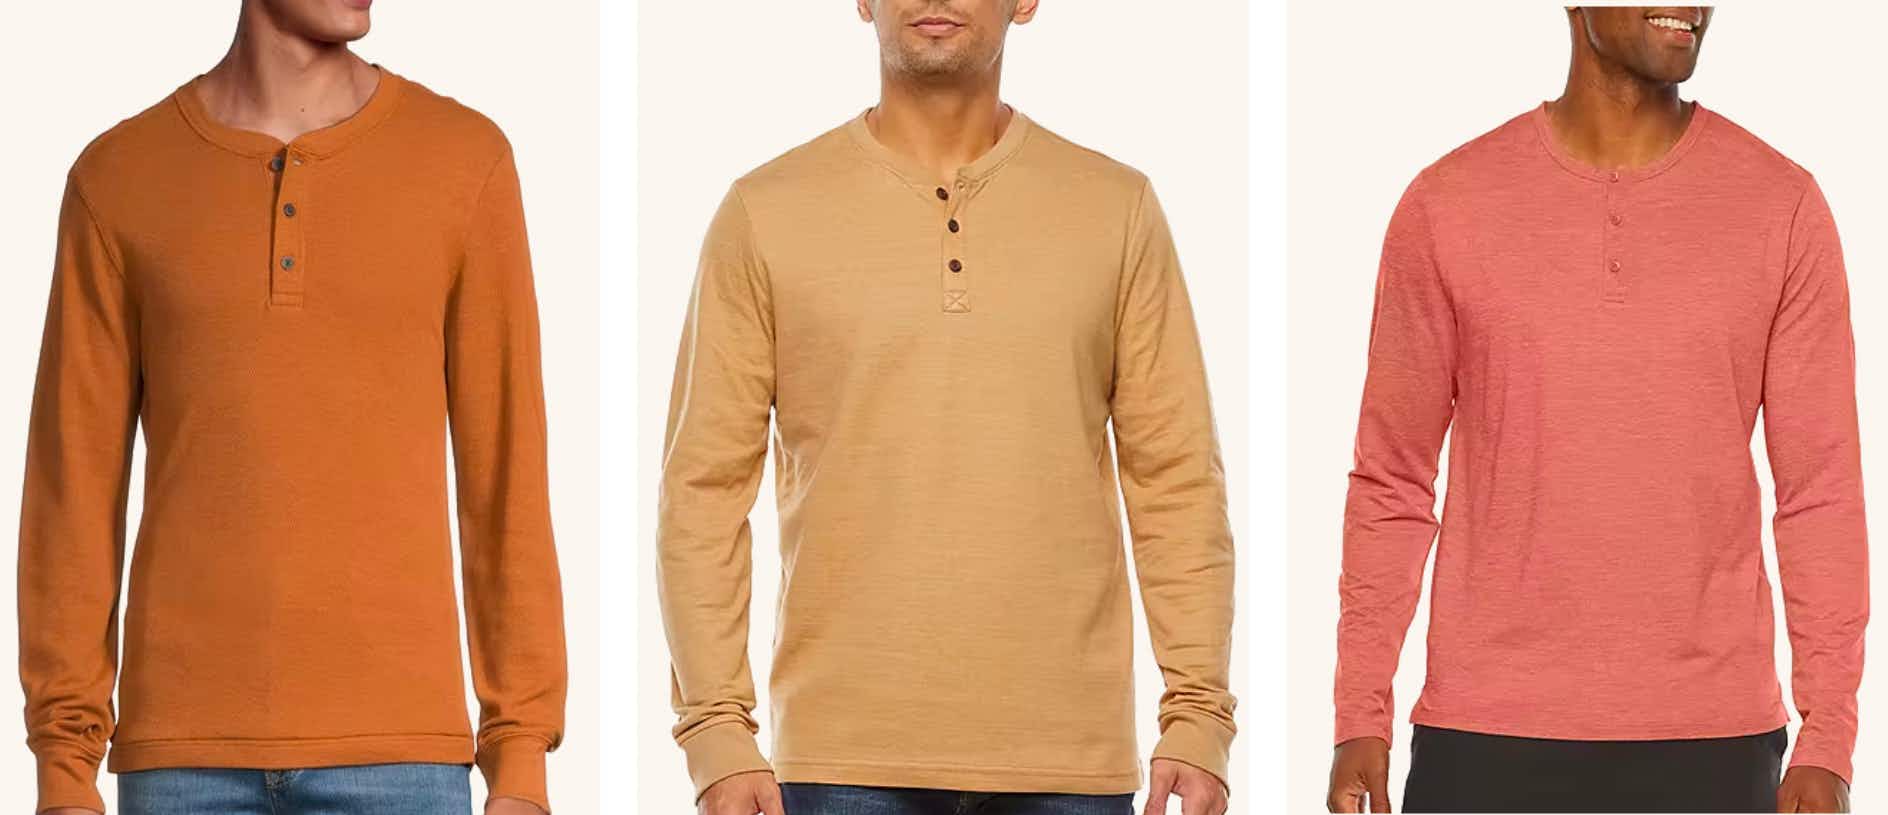 jcpenney mens henley long sleeves